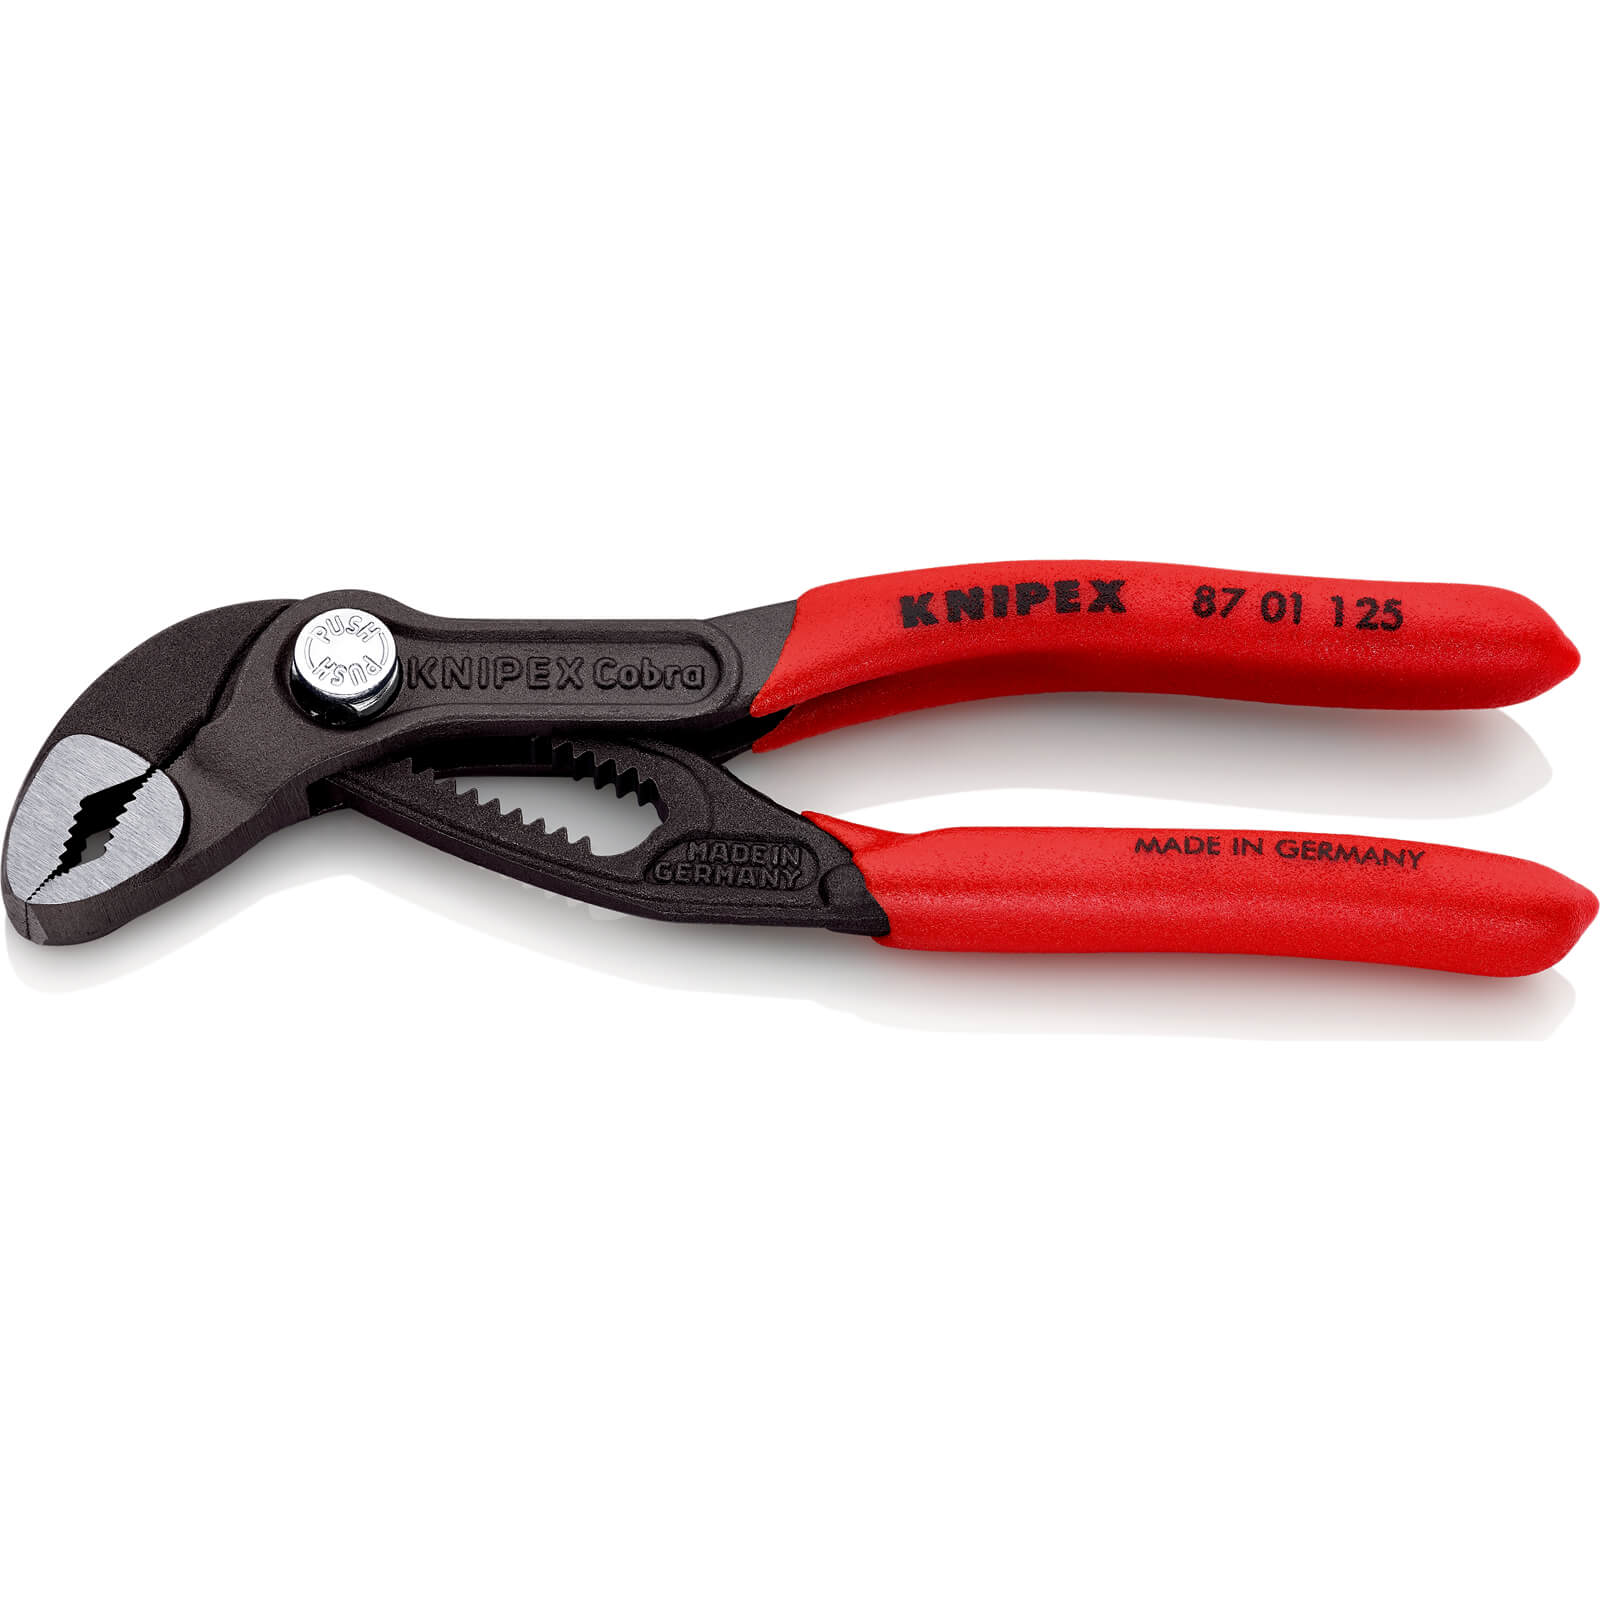 Image of Knipex 87 01 Cobra Hightech Water Pump Pliers 125mm